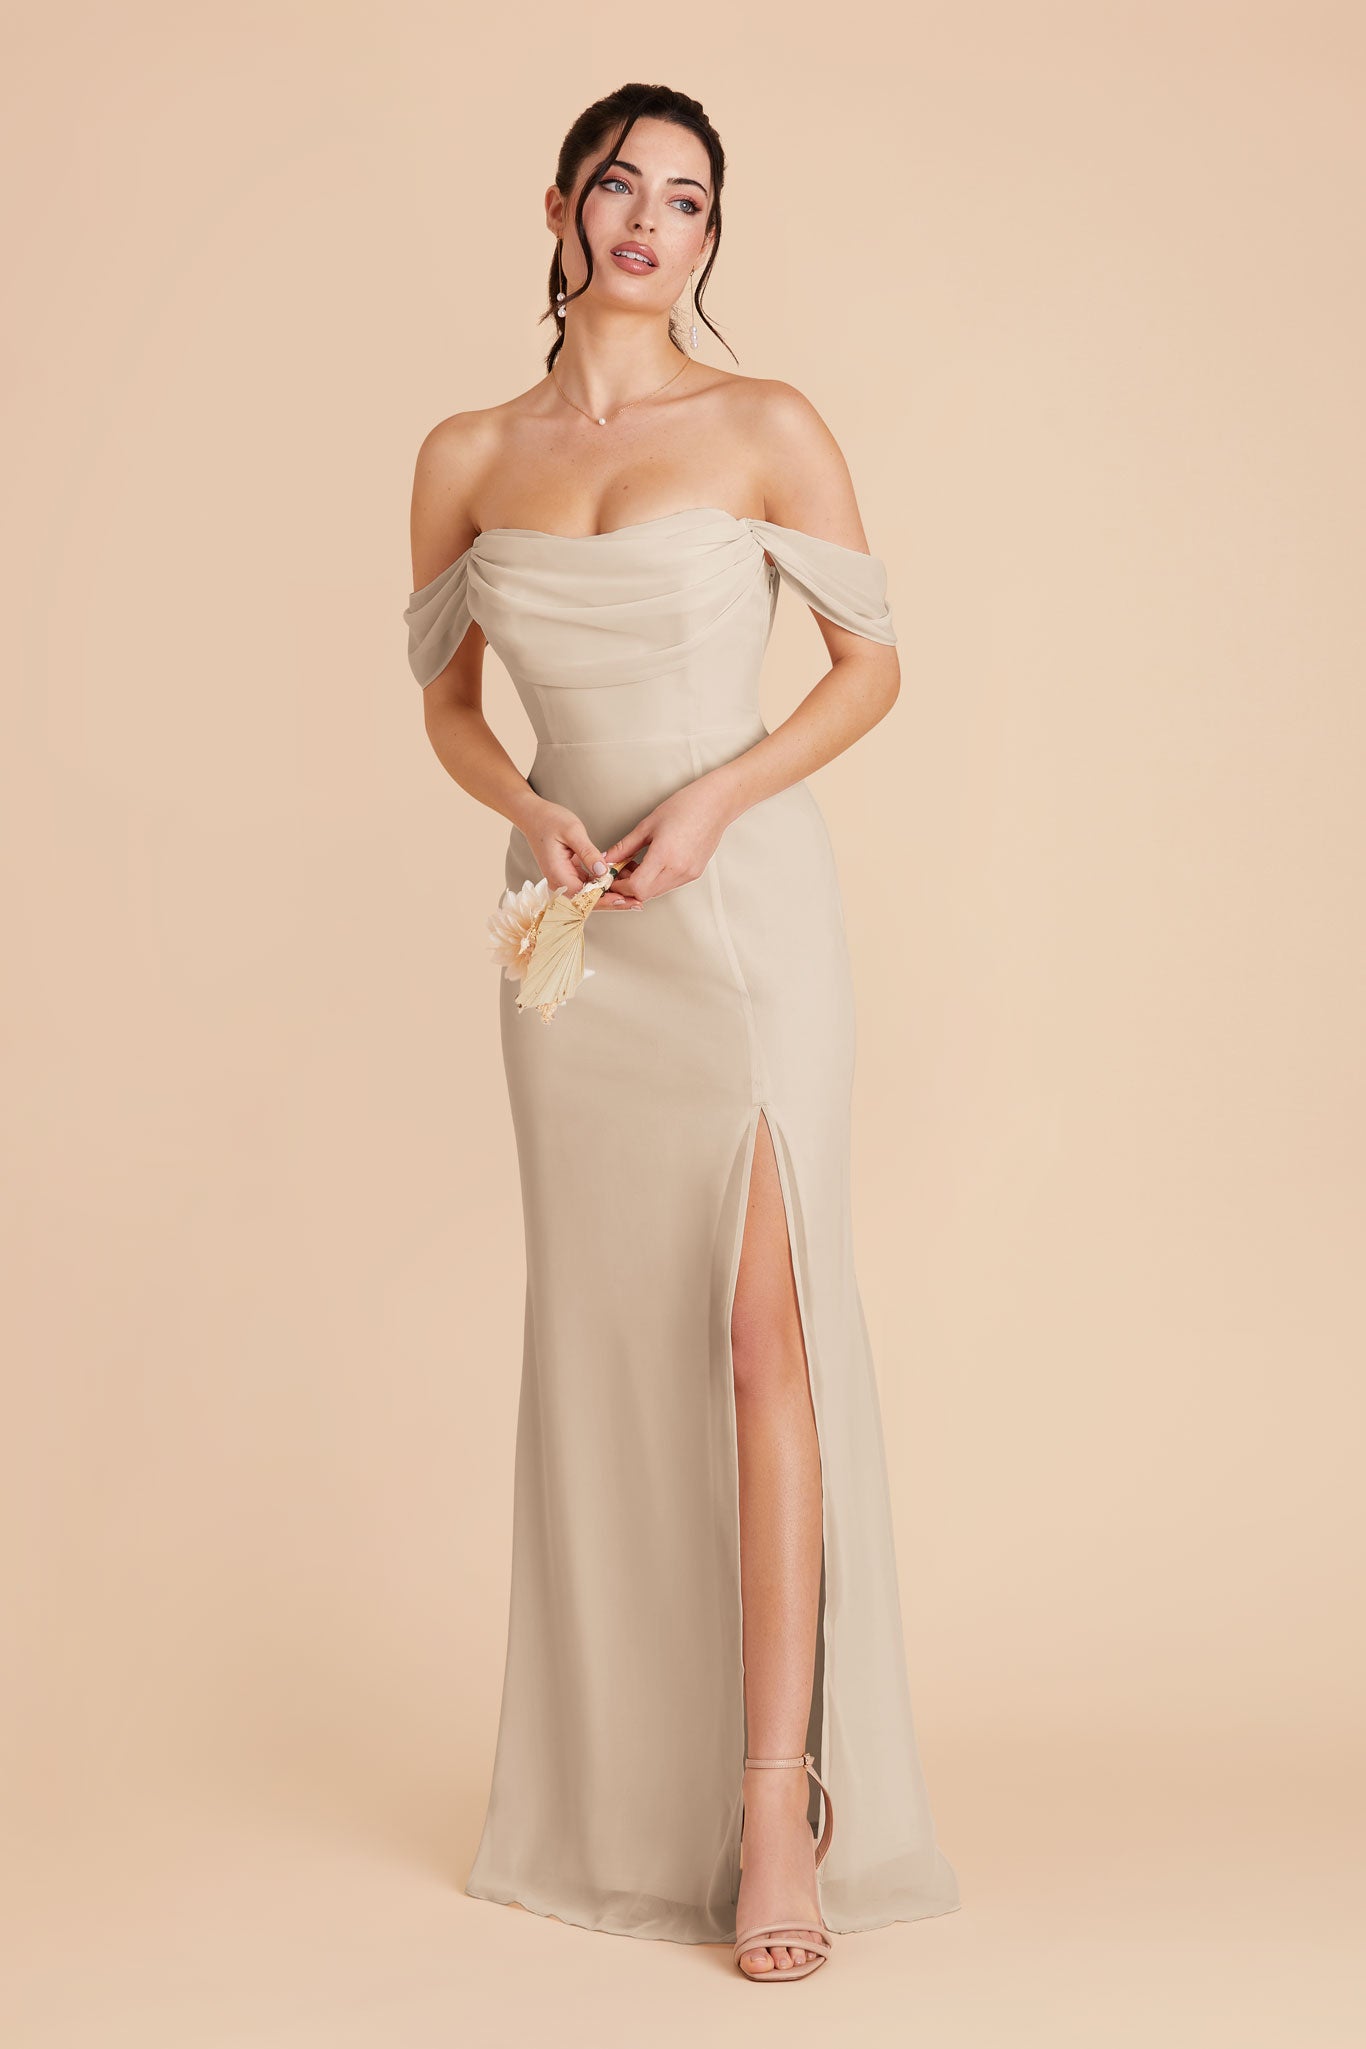 Neutral Champagne Mira Convertible Dress by Birdy Grey